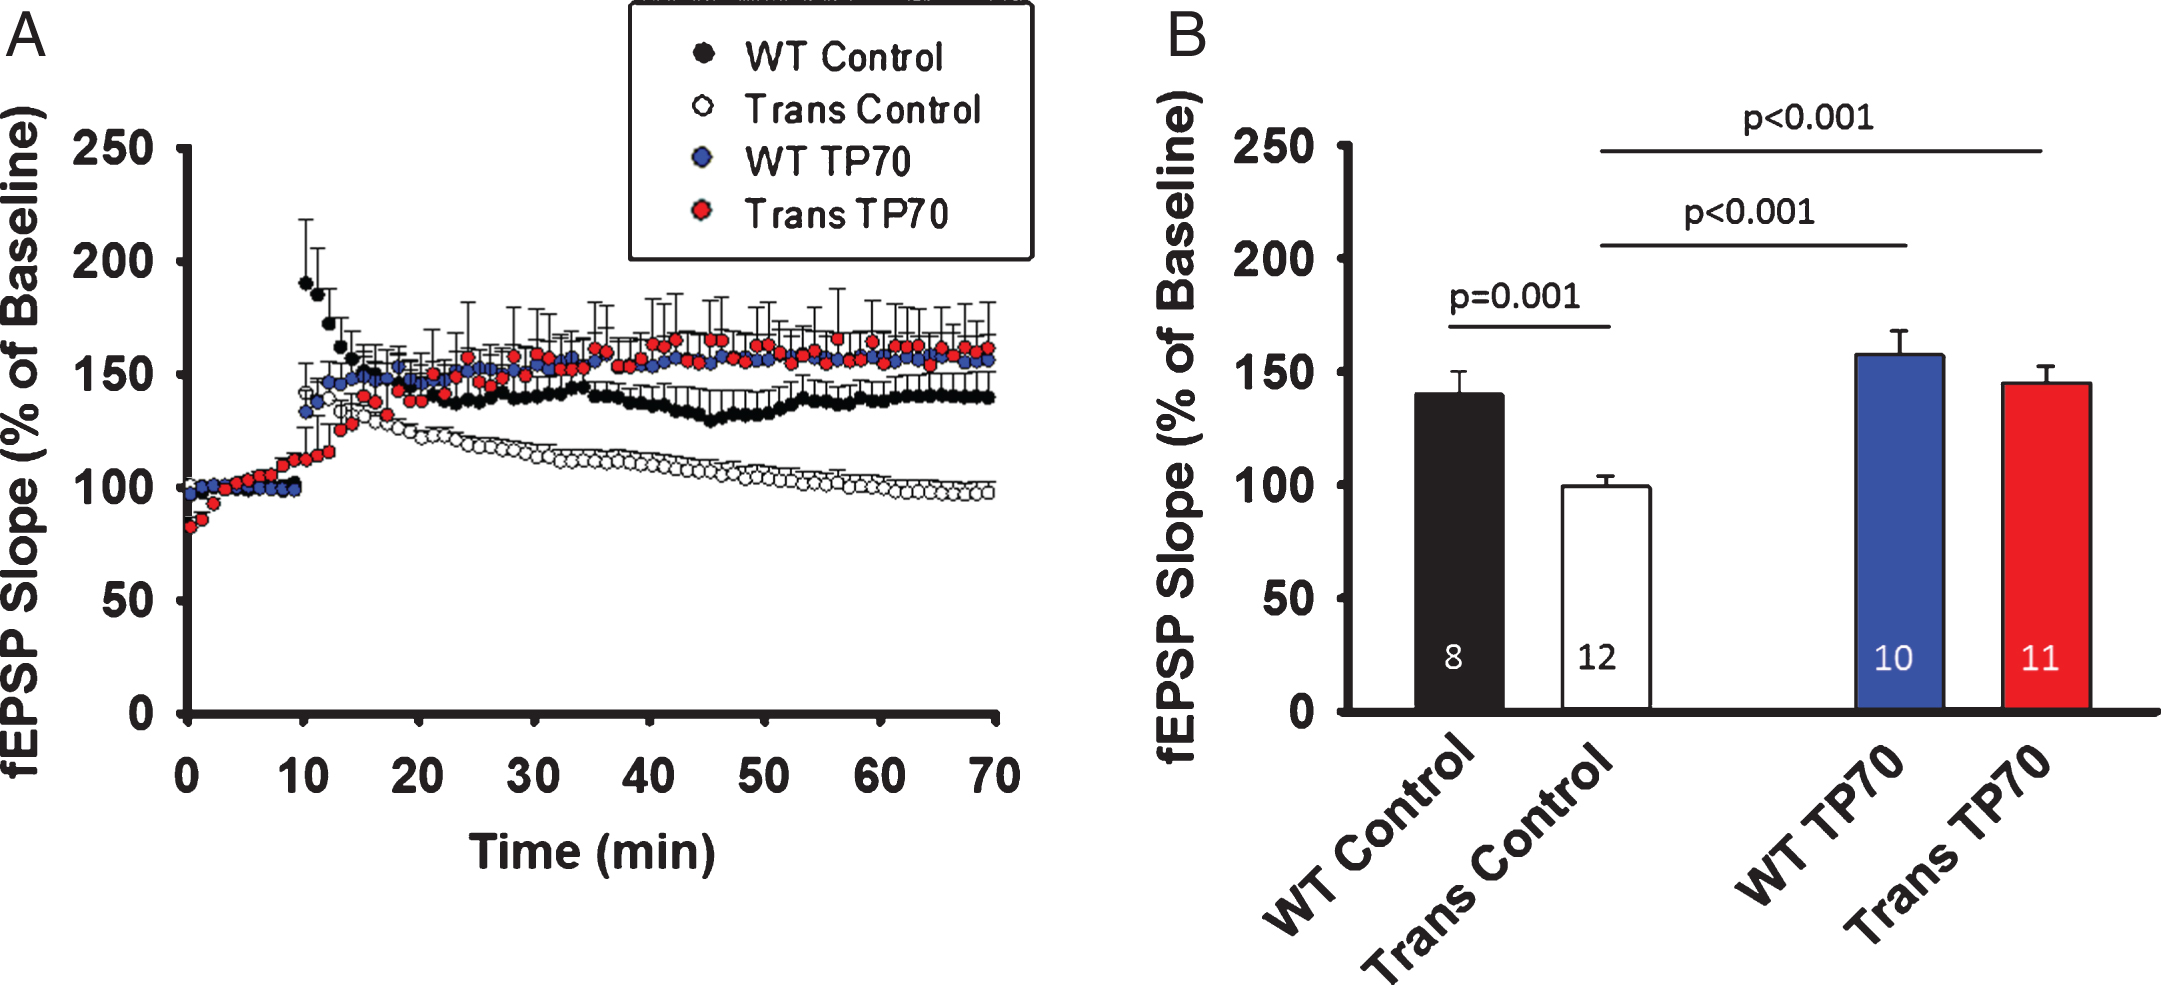 TP70 treatment mitigates hippocampal LTP deficits in 5xFAD mice. 5xFAD (Trans) mice and WT littermates at 15-16 months of age were intraperitoneally injected either 25 mg/kg TP70 or equal volume of vehicle. The mice were sacrificed 24 h later and hippocampal slices obtained for recording. A) Traces and time course of LTP induction showing that TP70 treatment of 5xFAD mice enhanced the amplitude of LTP to the levels not different from those of WT mice. B) Summary bar plot showing the average fEPSP slope at 45 min after high frequency stimulation. Data were compiled from recordings using slices obtained from 3 mice per group. The number within each bar indicates the number of slices used for recording.